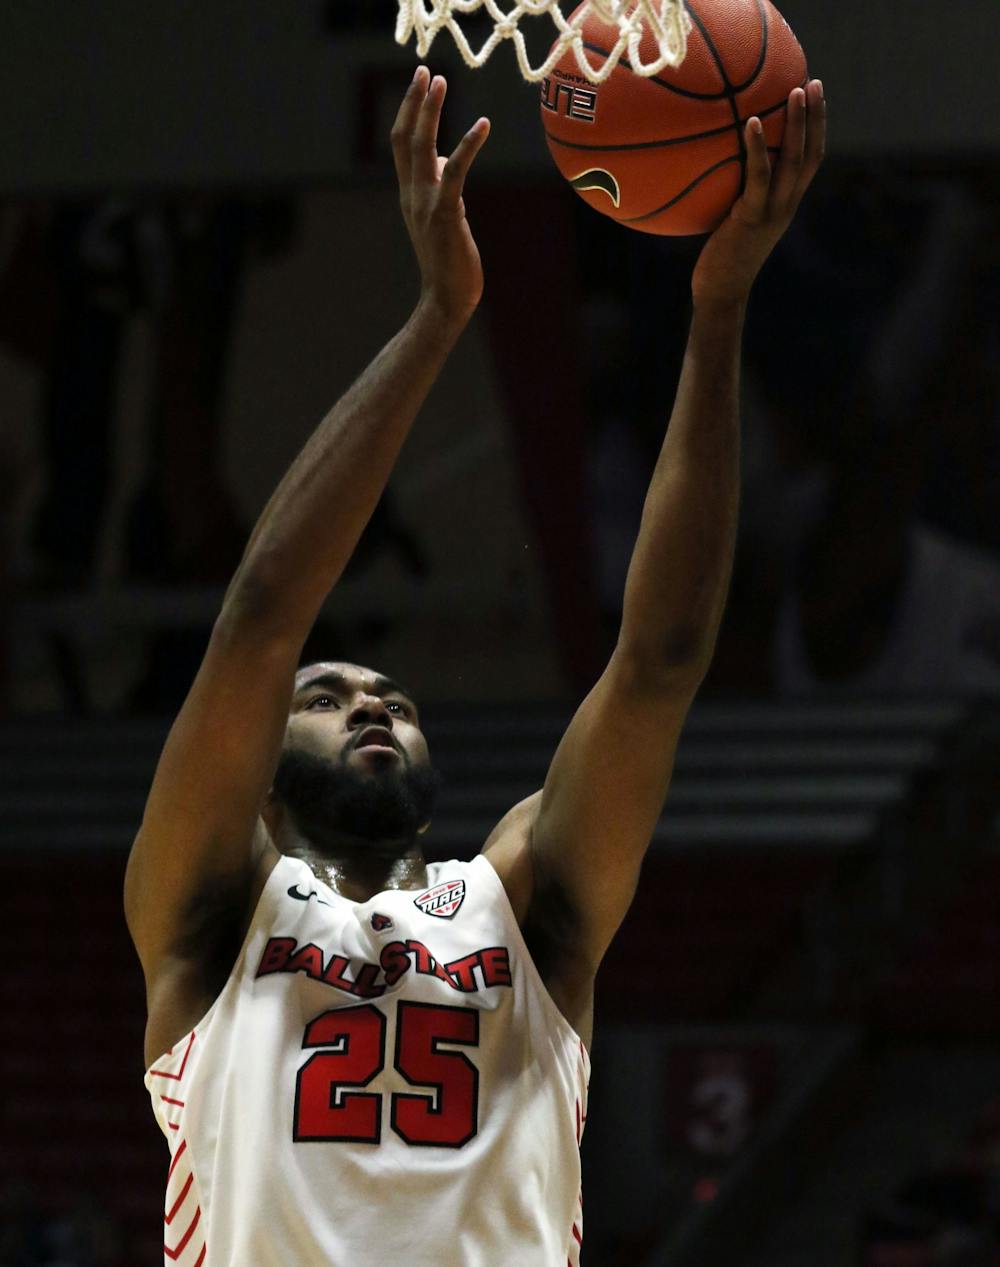 Lopsided first half stuns Ball State comeback in loss to Evansville